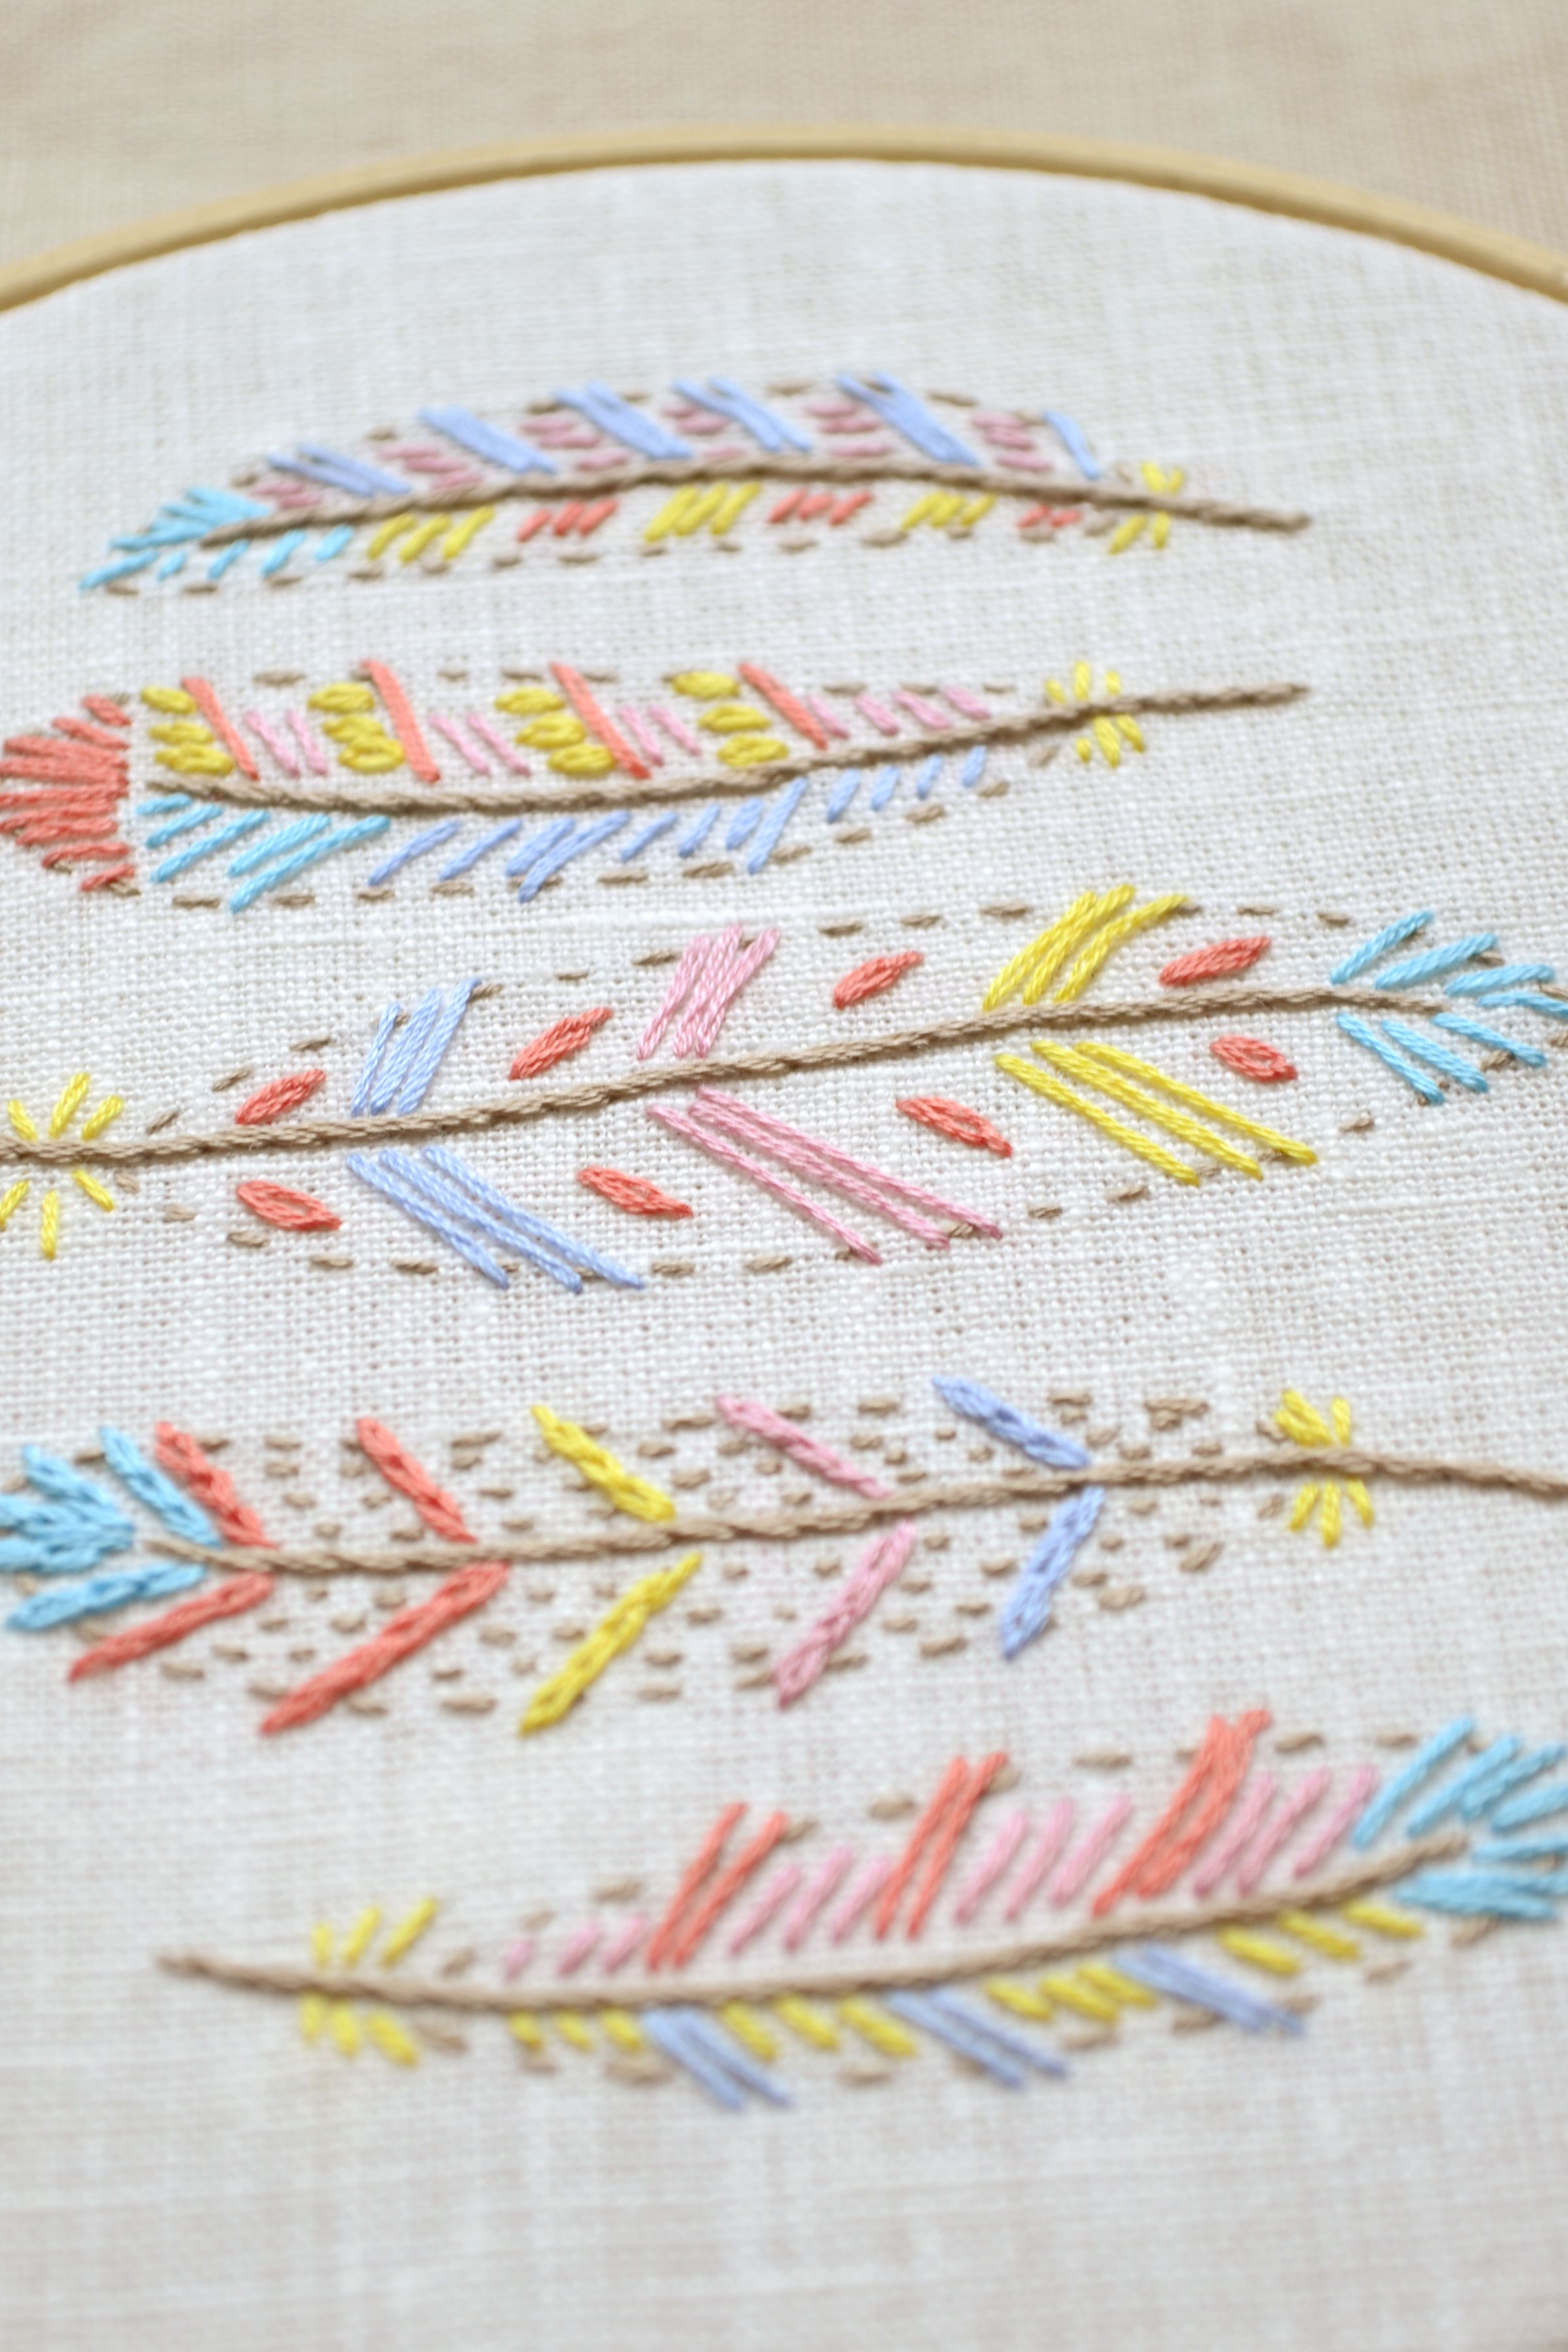 Hand Embroidery Patterns Free Hand Embroidery Letters Patterns Free Fresh Hand Embroidery Pattern